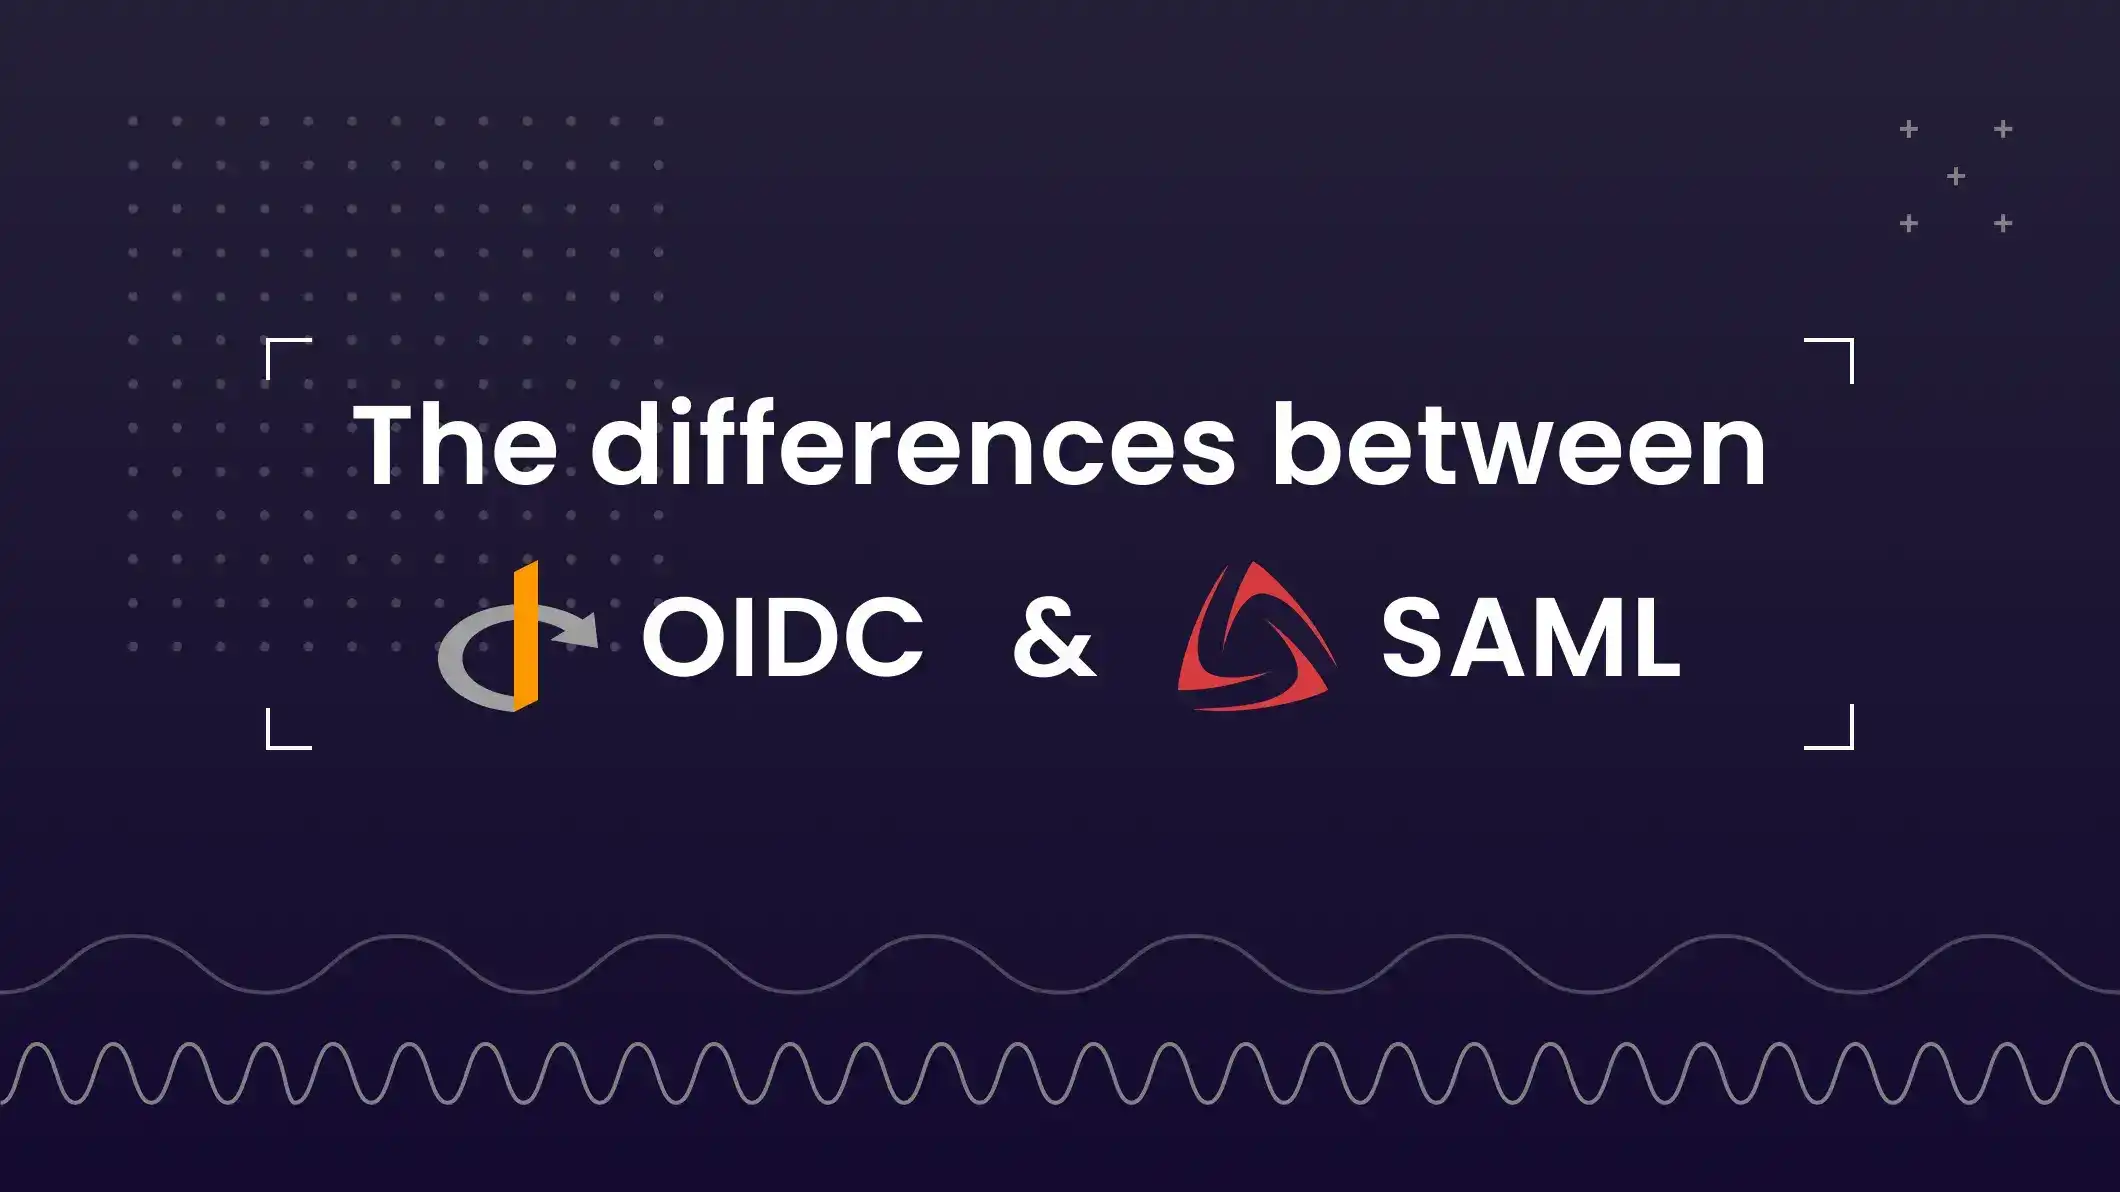 What are differences between SAML and OIDC?